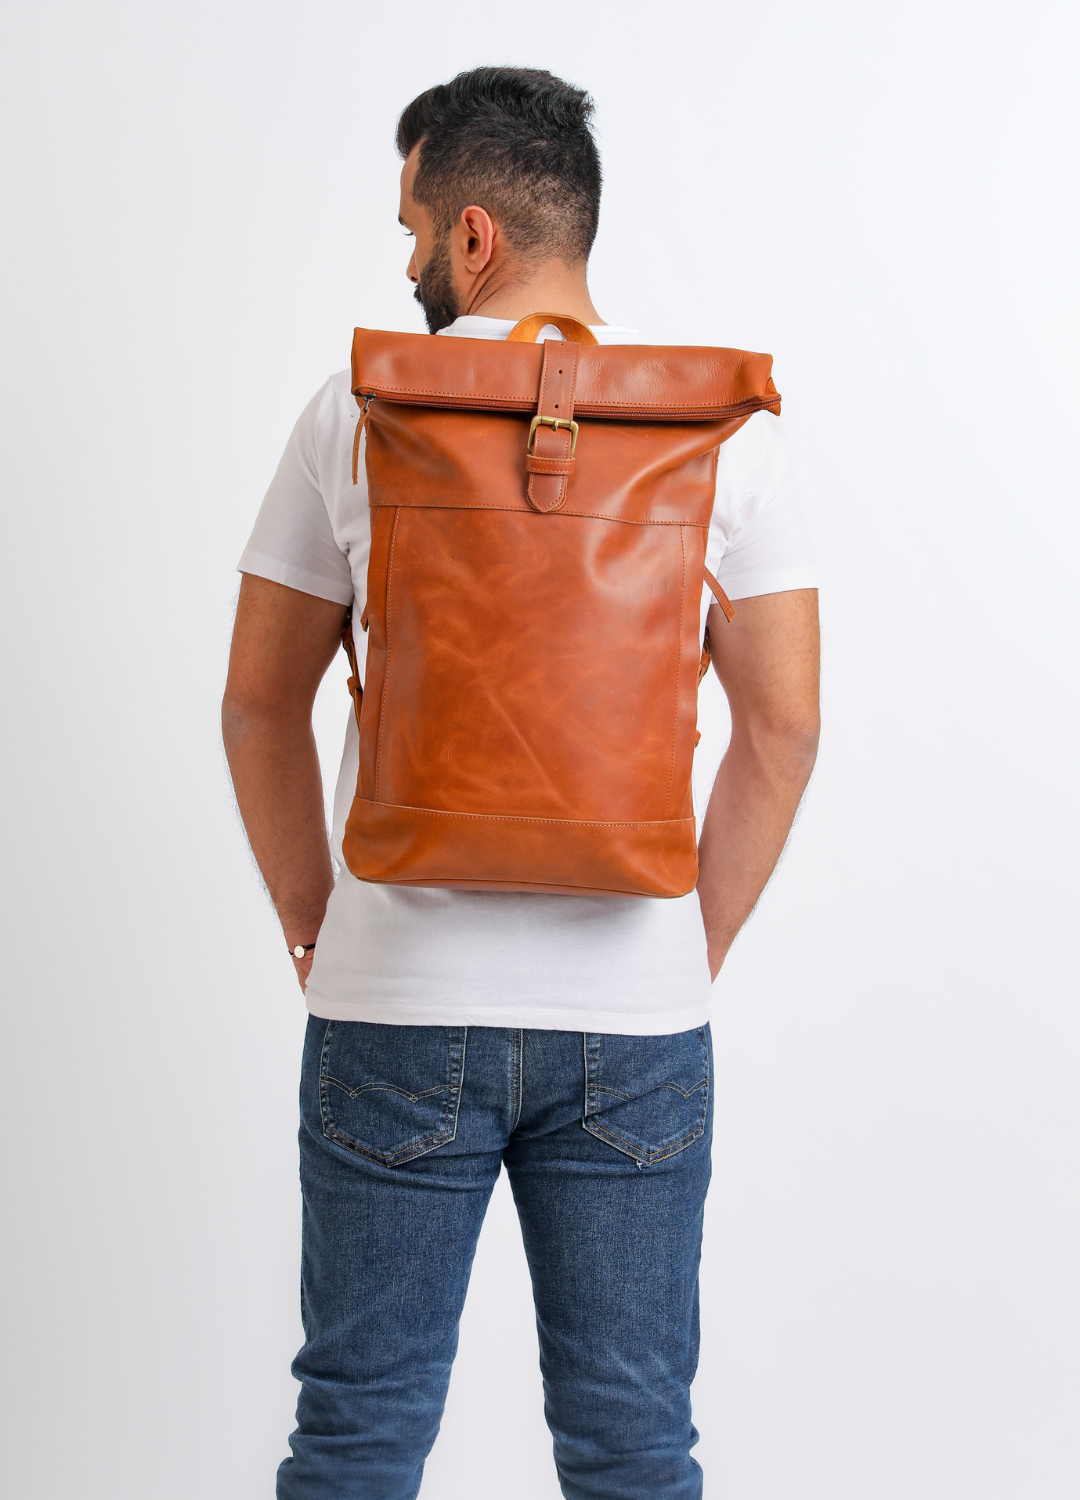 Leather Roll Top Backpack in Cognac